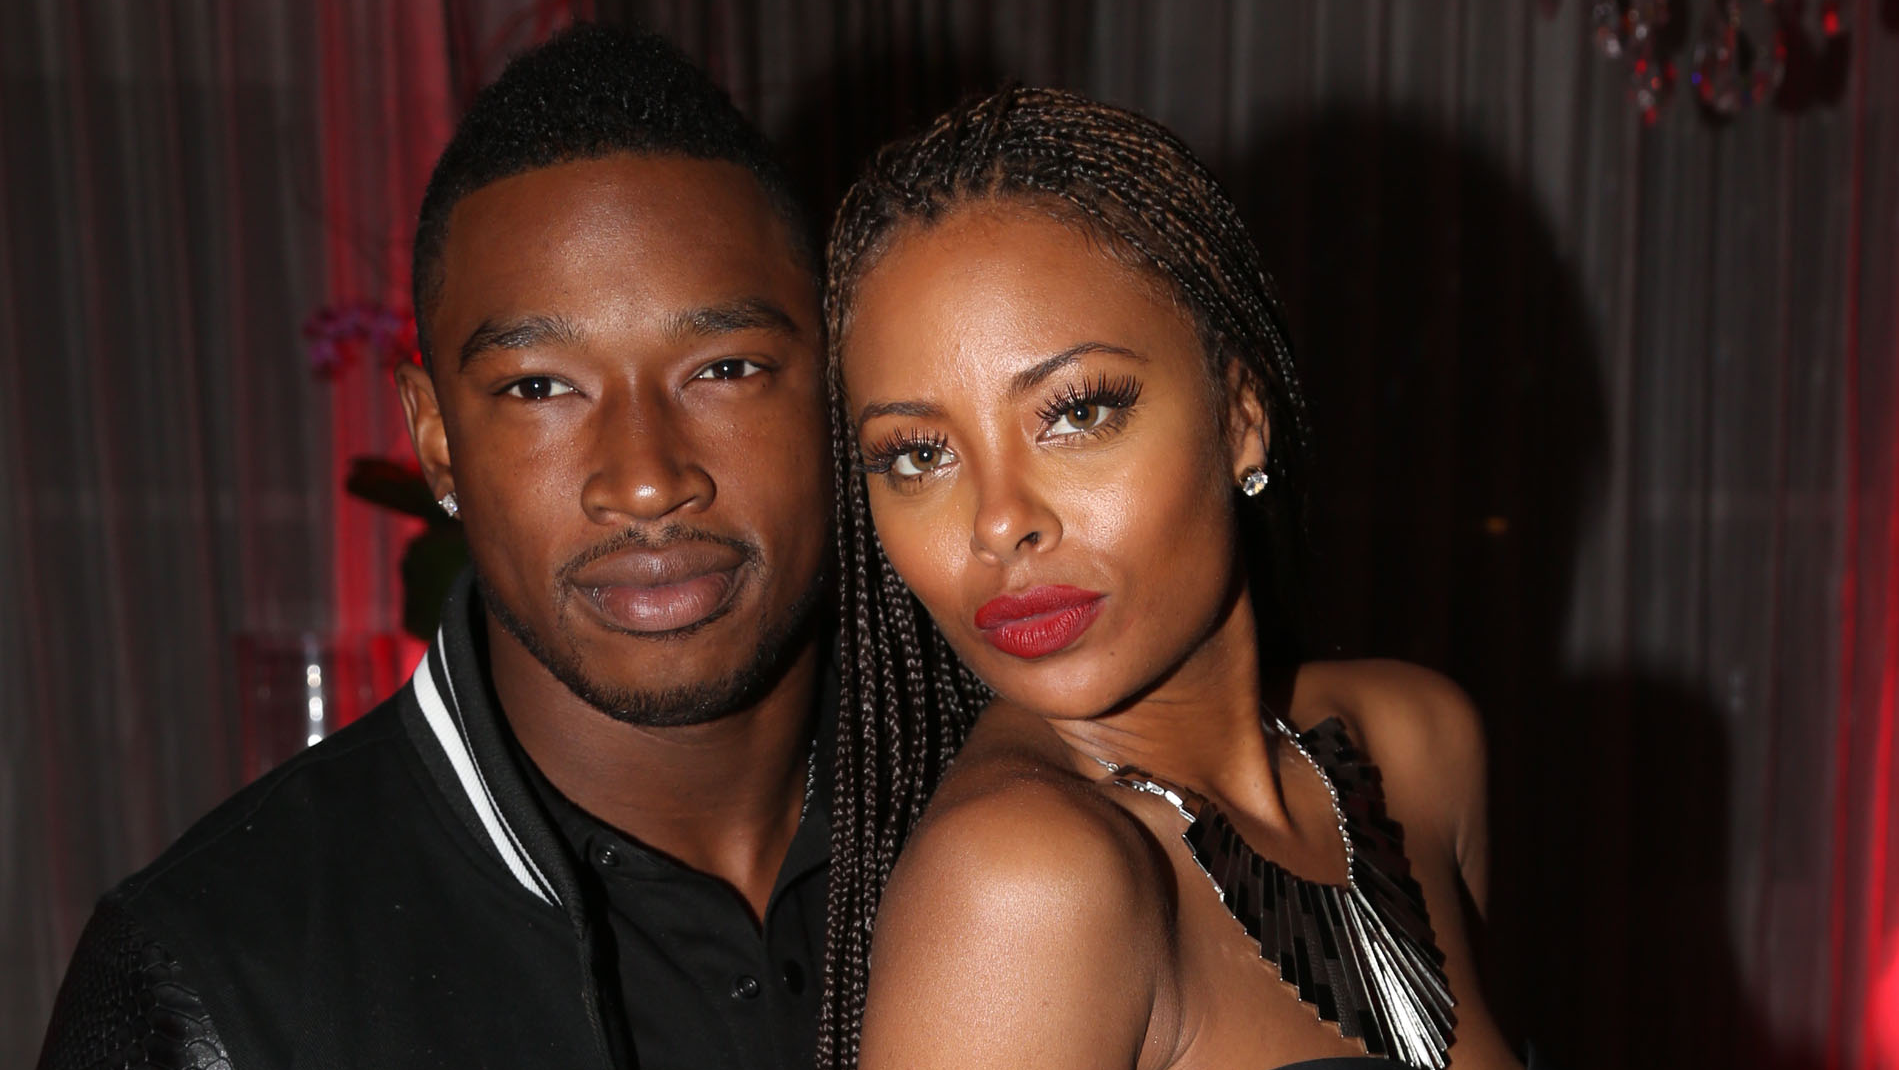 ‘RHOA’ Star Eva Marcille’s Ex Kevin McCall Charged For Domestic Violence